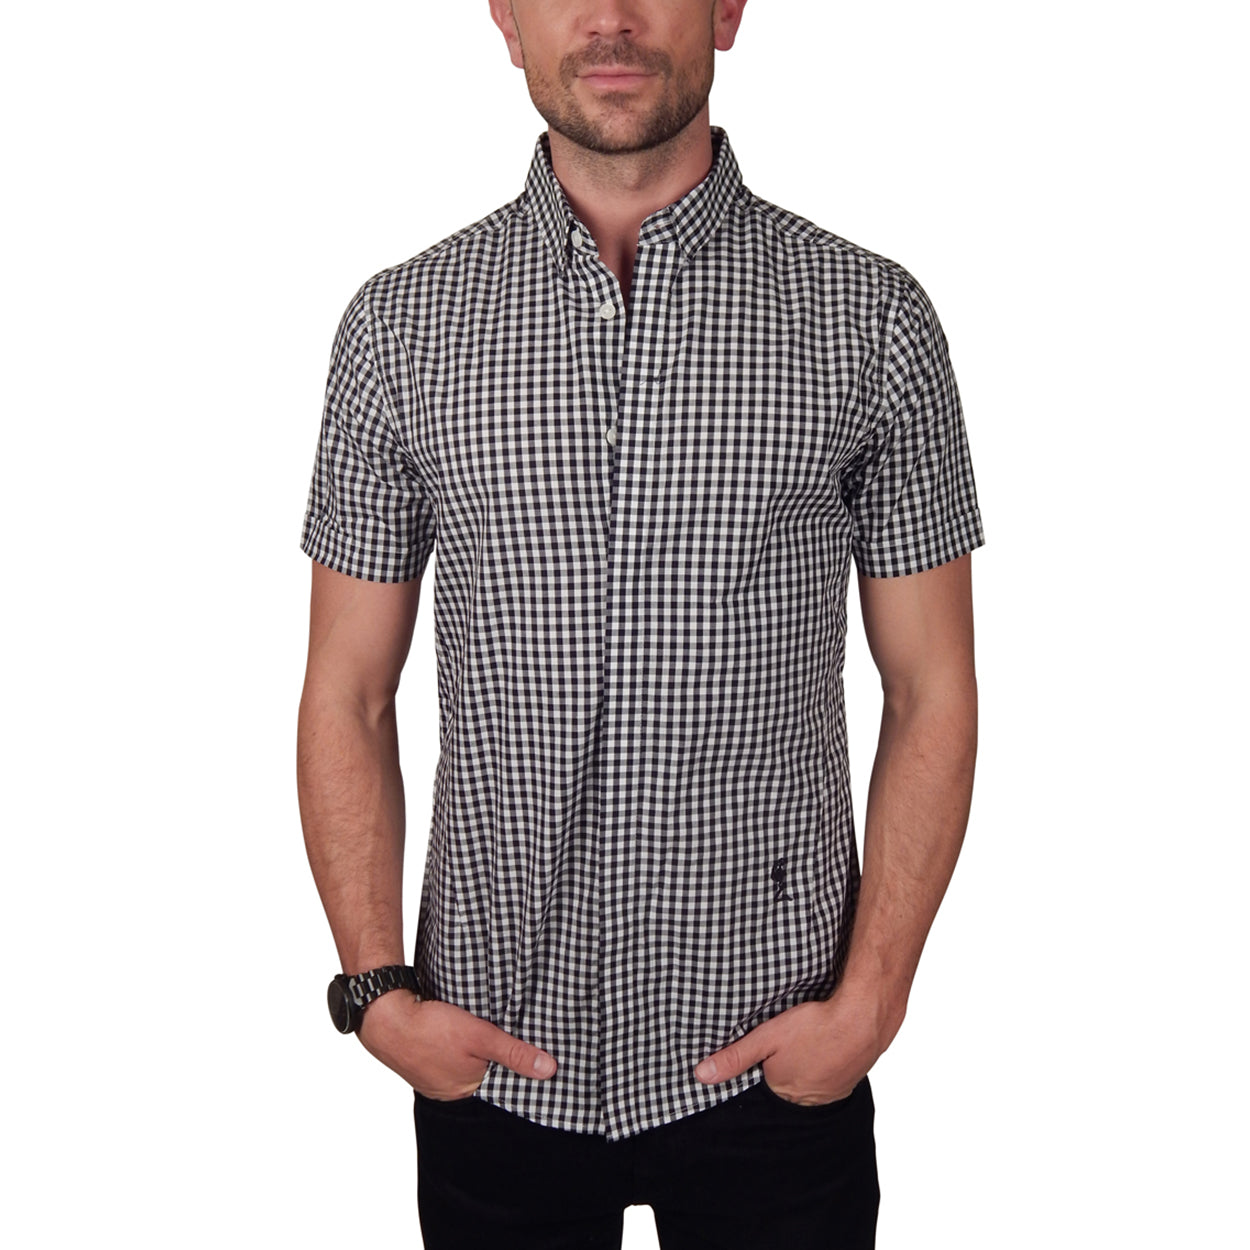 RELIGION - &quot;INSIGHT&quot; Checked Short Sleeve Shirt in Black and White